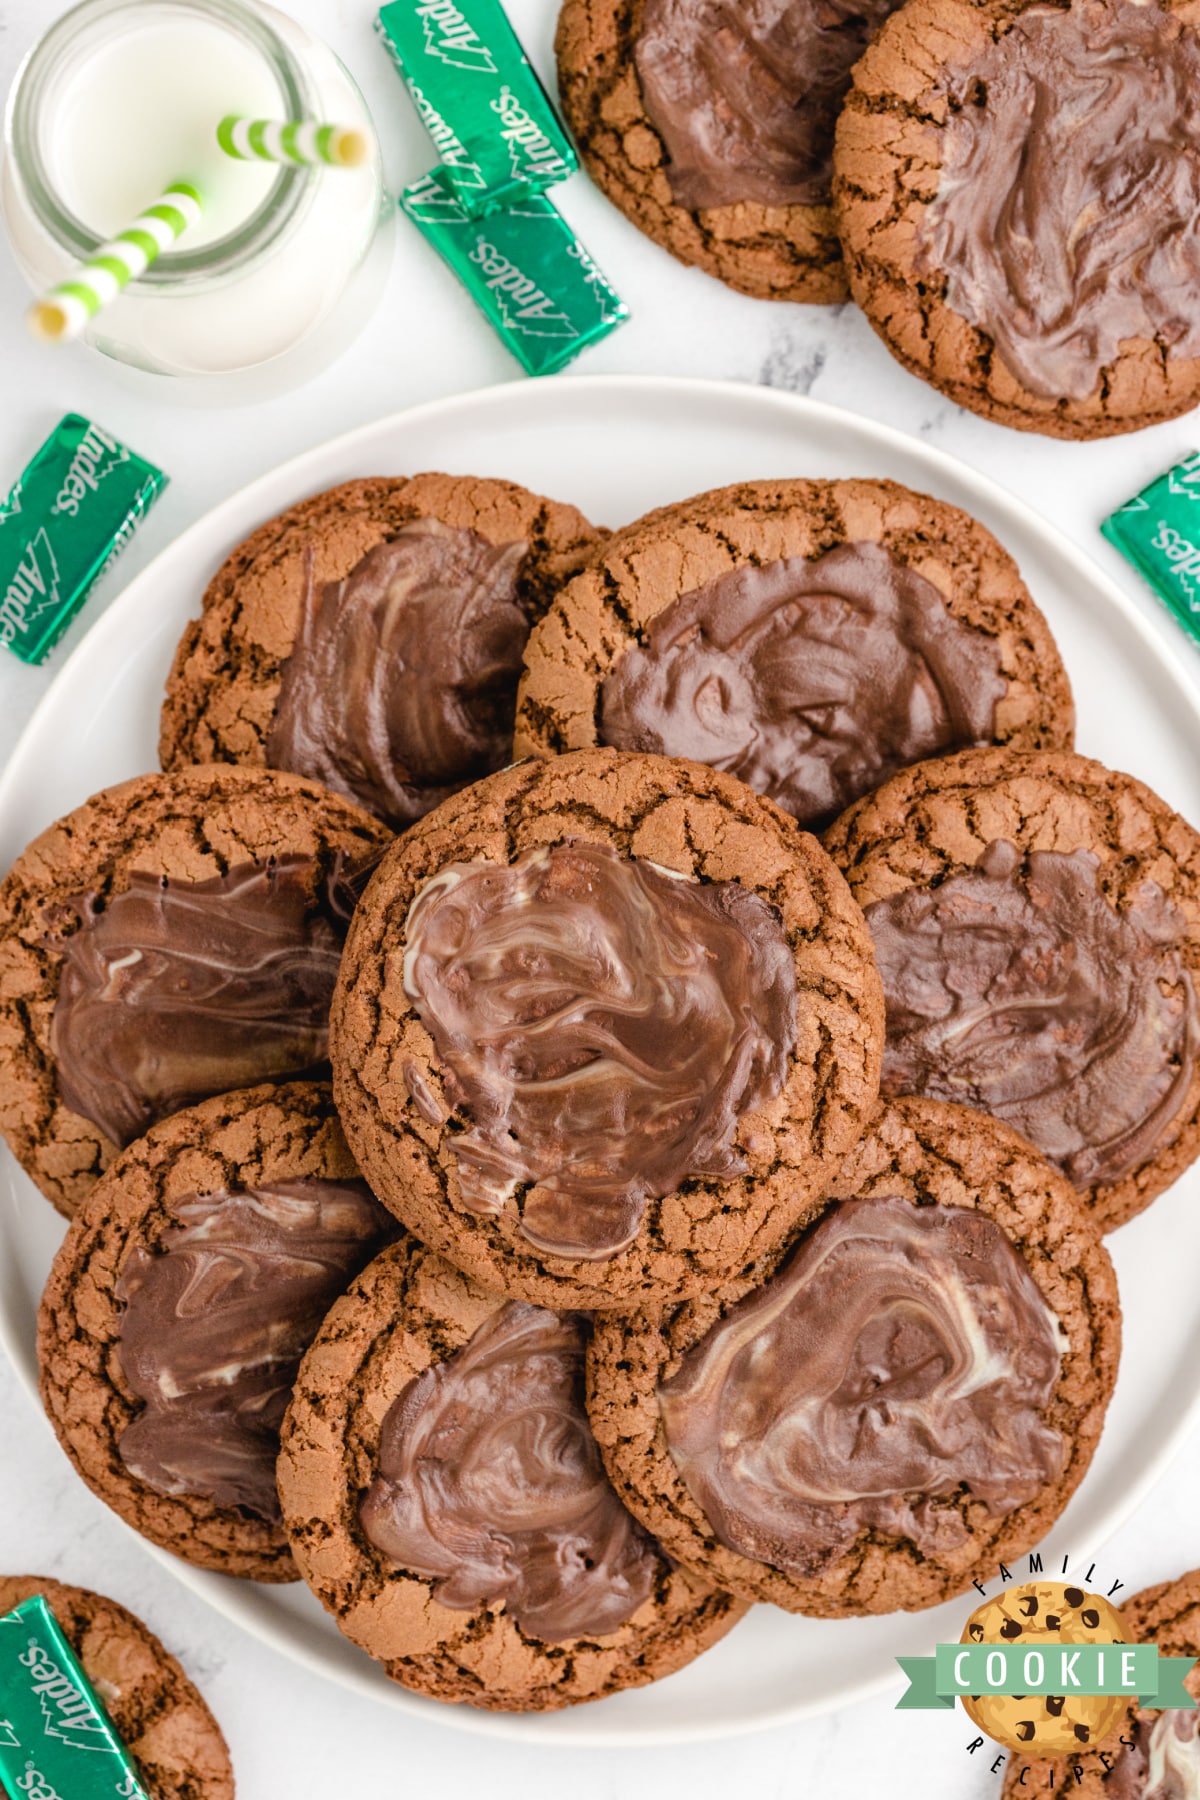 Chocolate cookies with a melted Andes mint on top